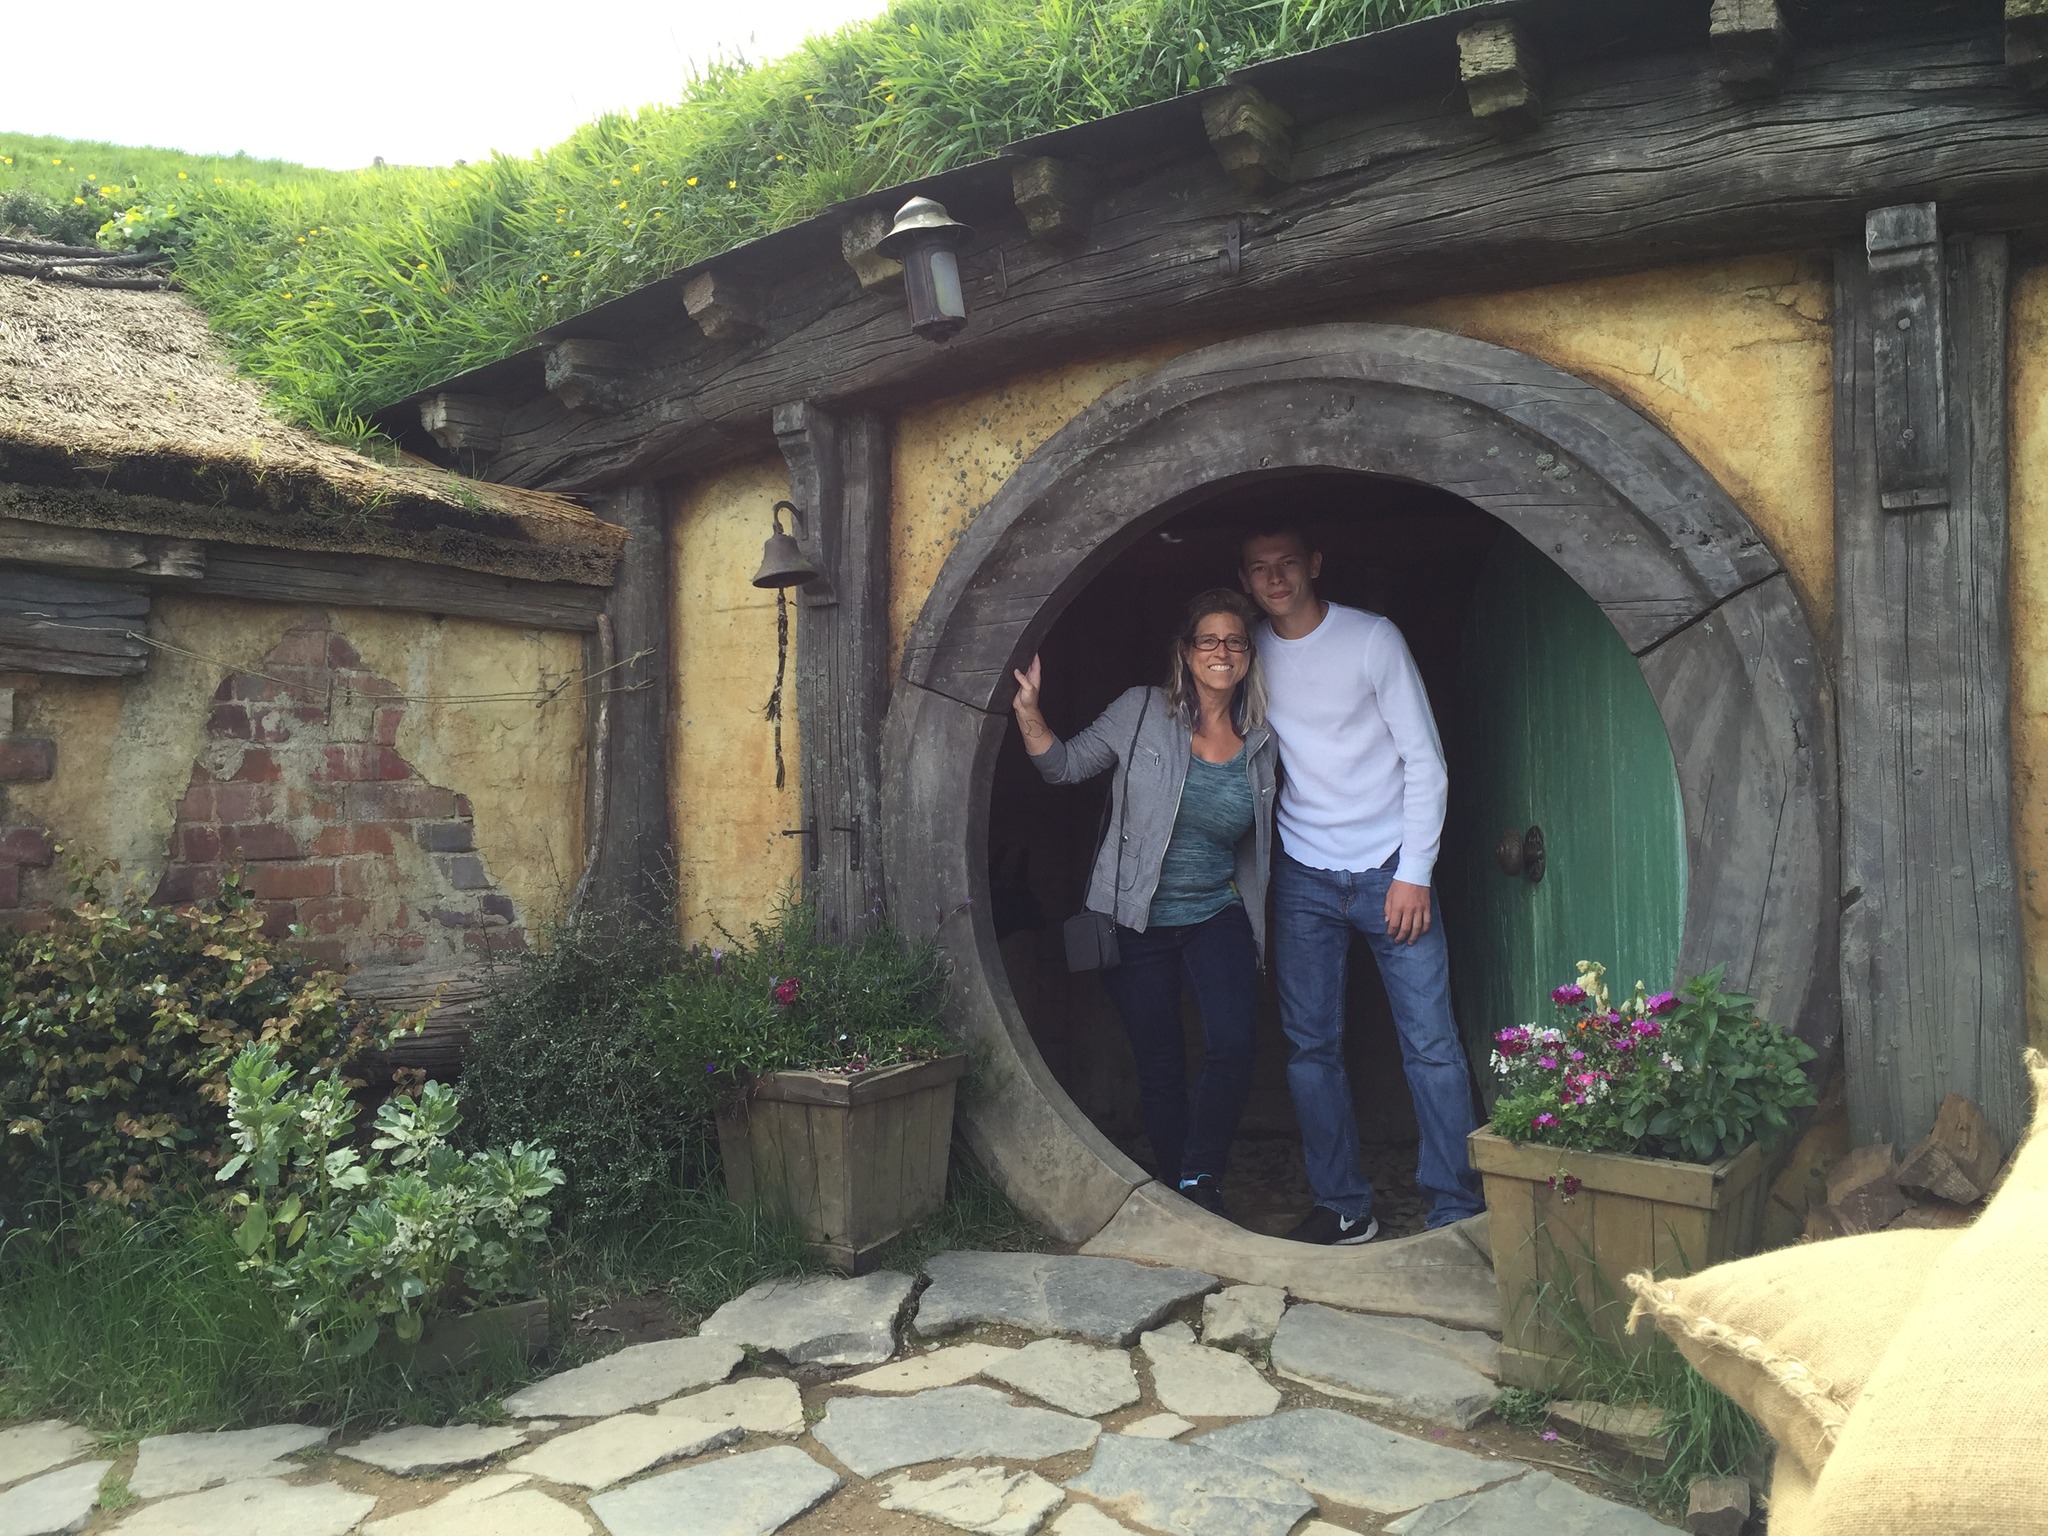 Our Day as a Hobbit